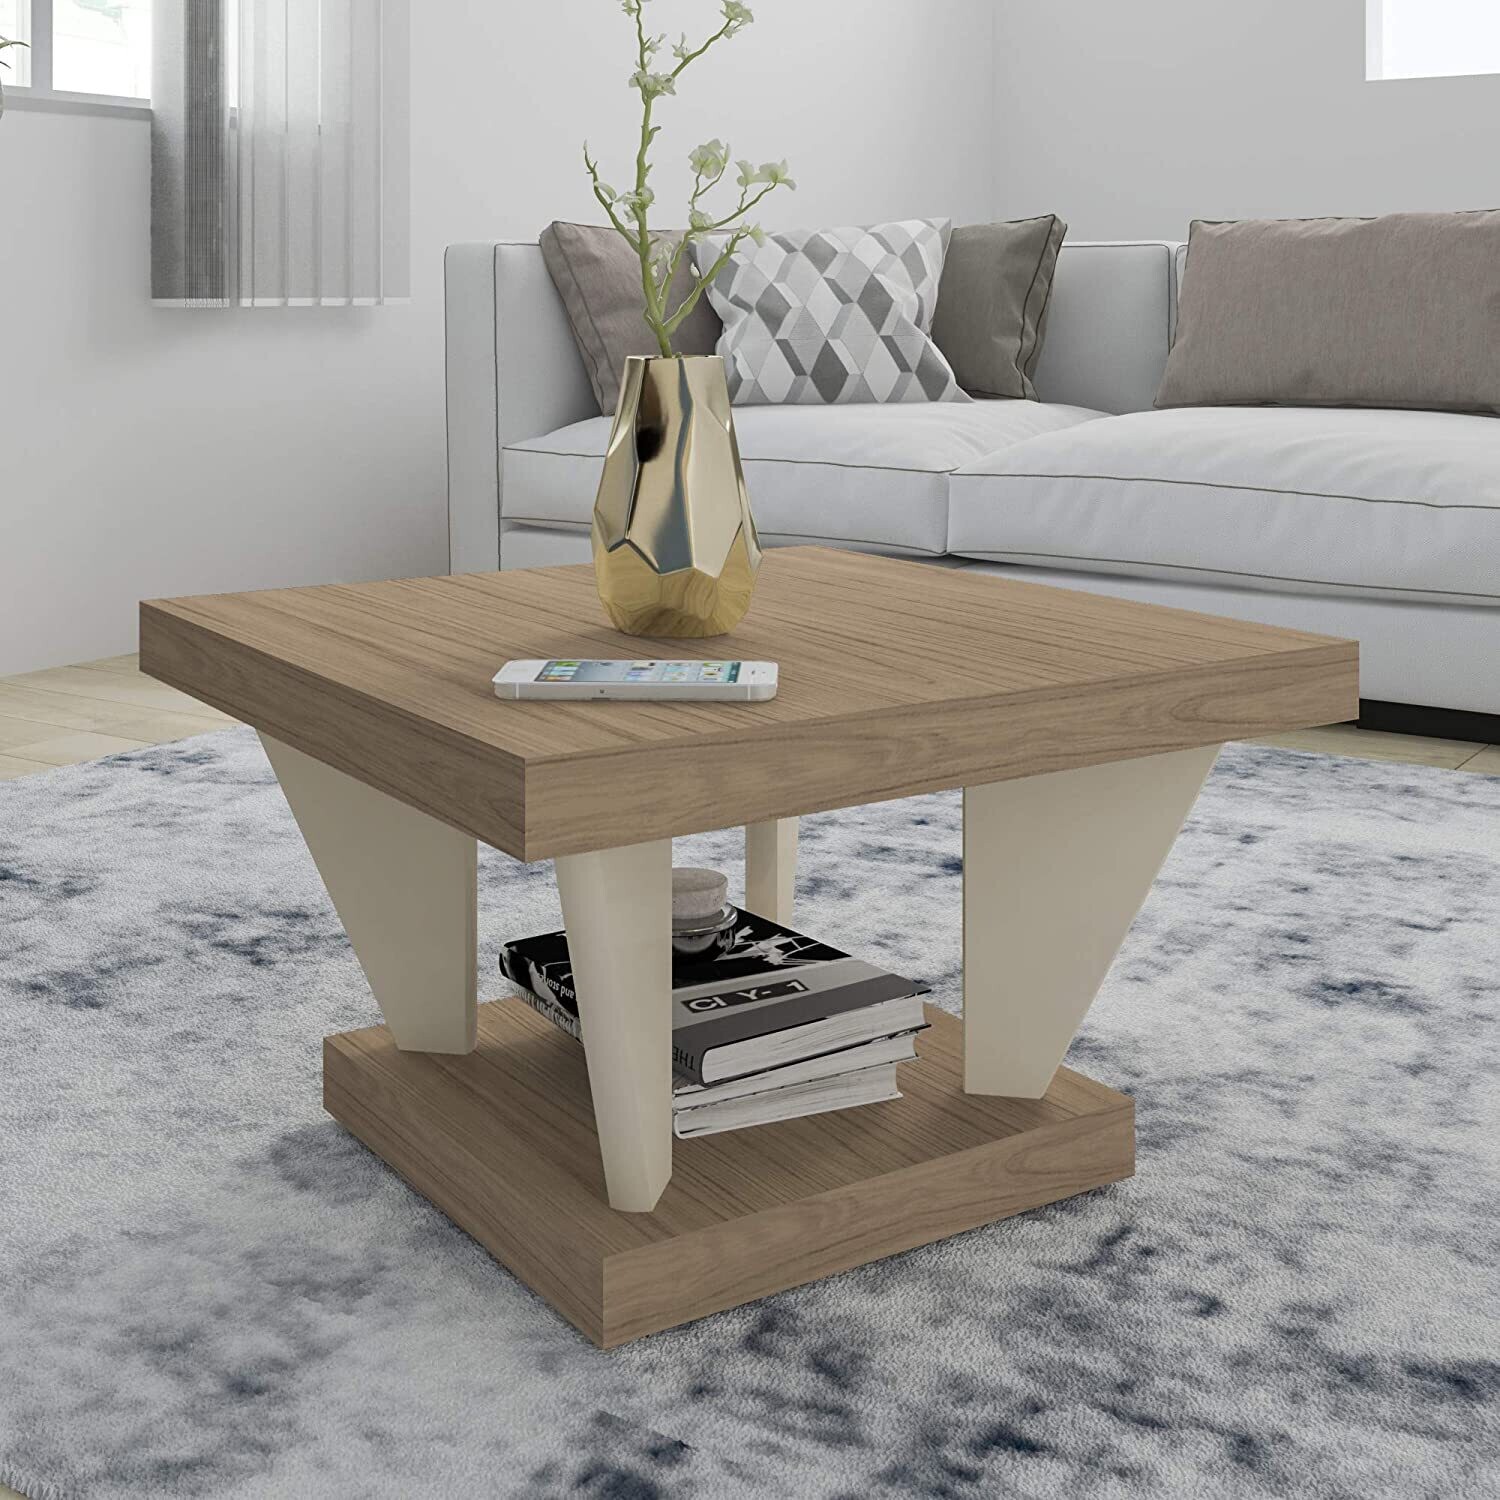 Artely Holanda Coffee Table, Oak Brown With Off White - W 59 X D 59 X H 37.5 cm